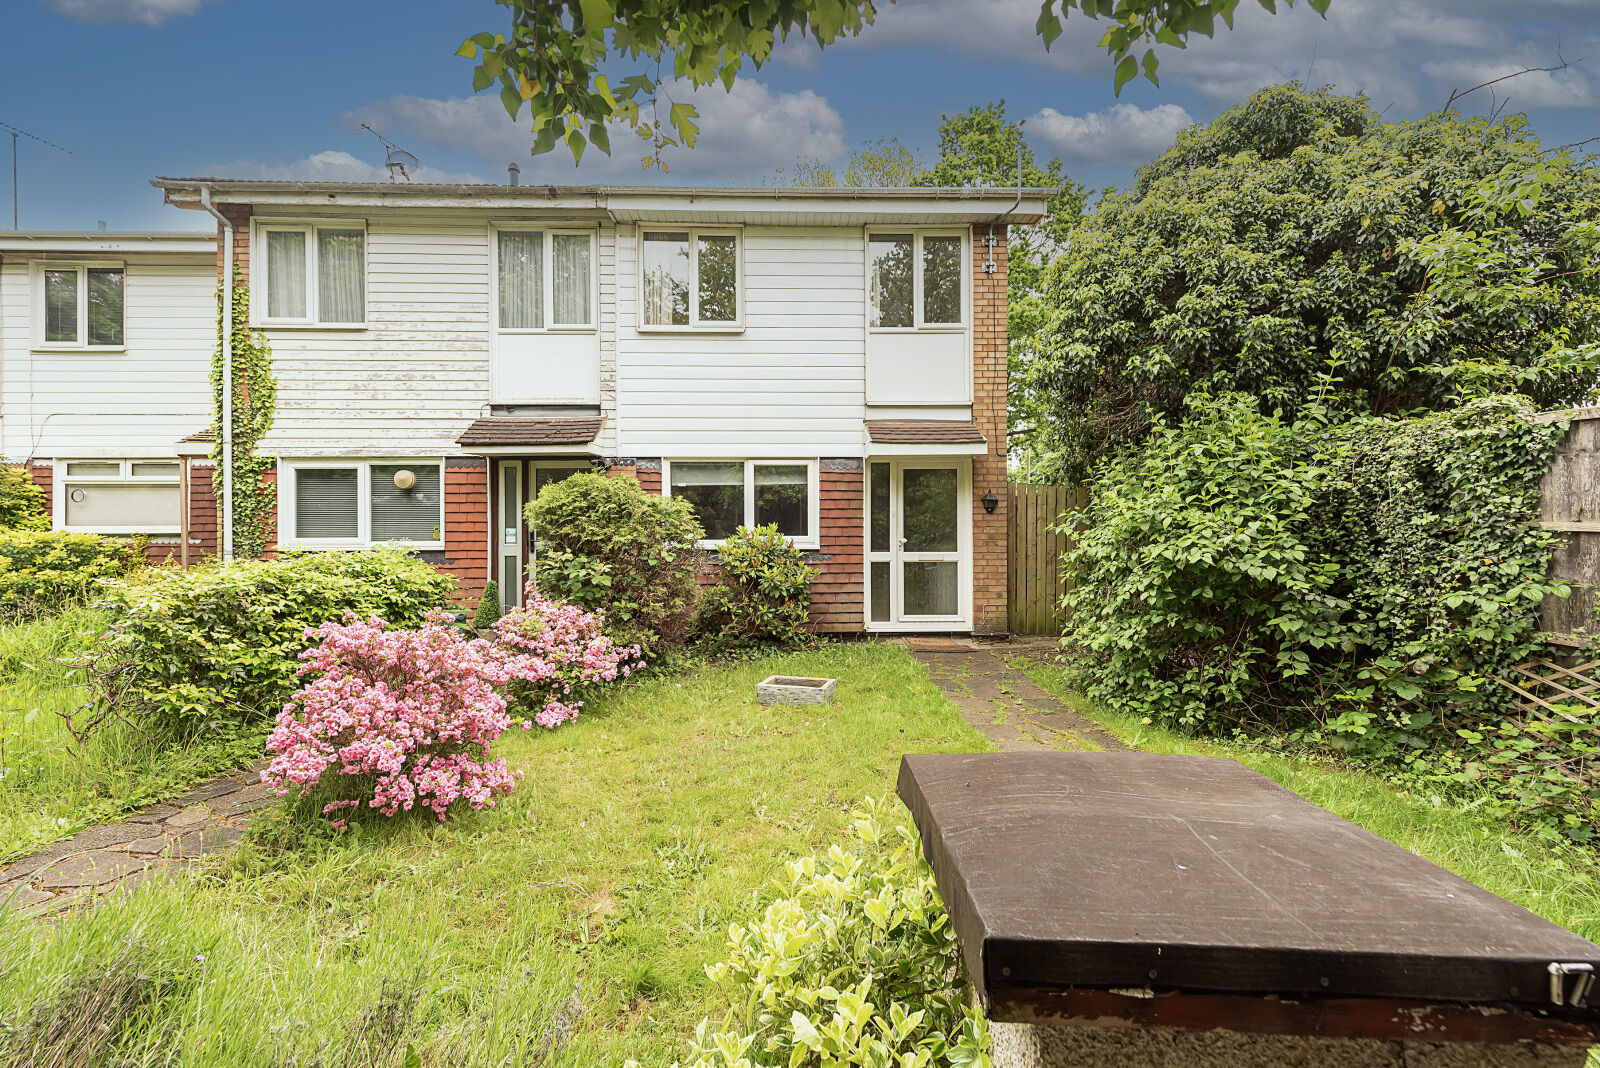 3 bedroom end terraced house to rent, Available now Drakes Drive, St. Albans, AL1, main image